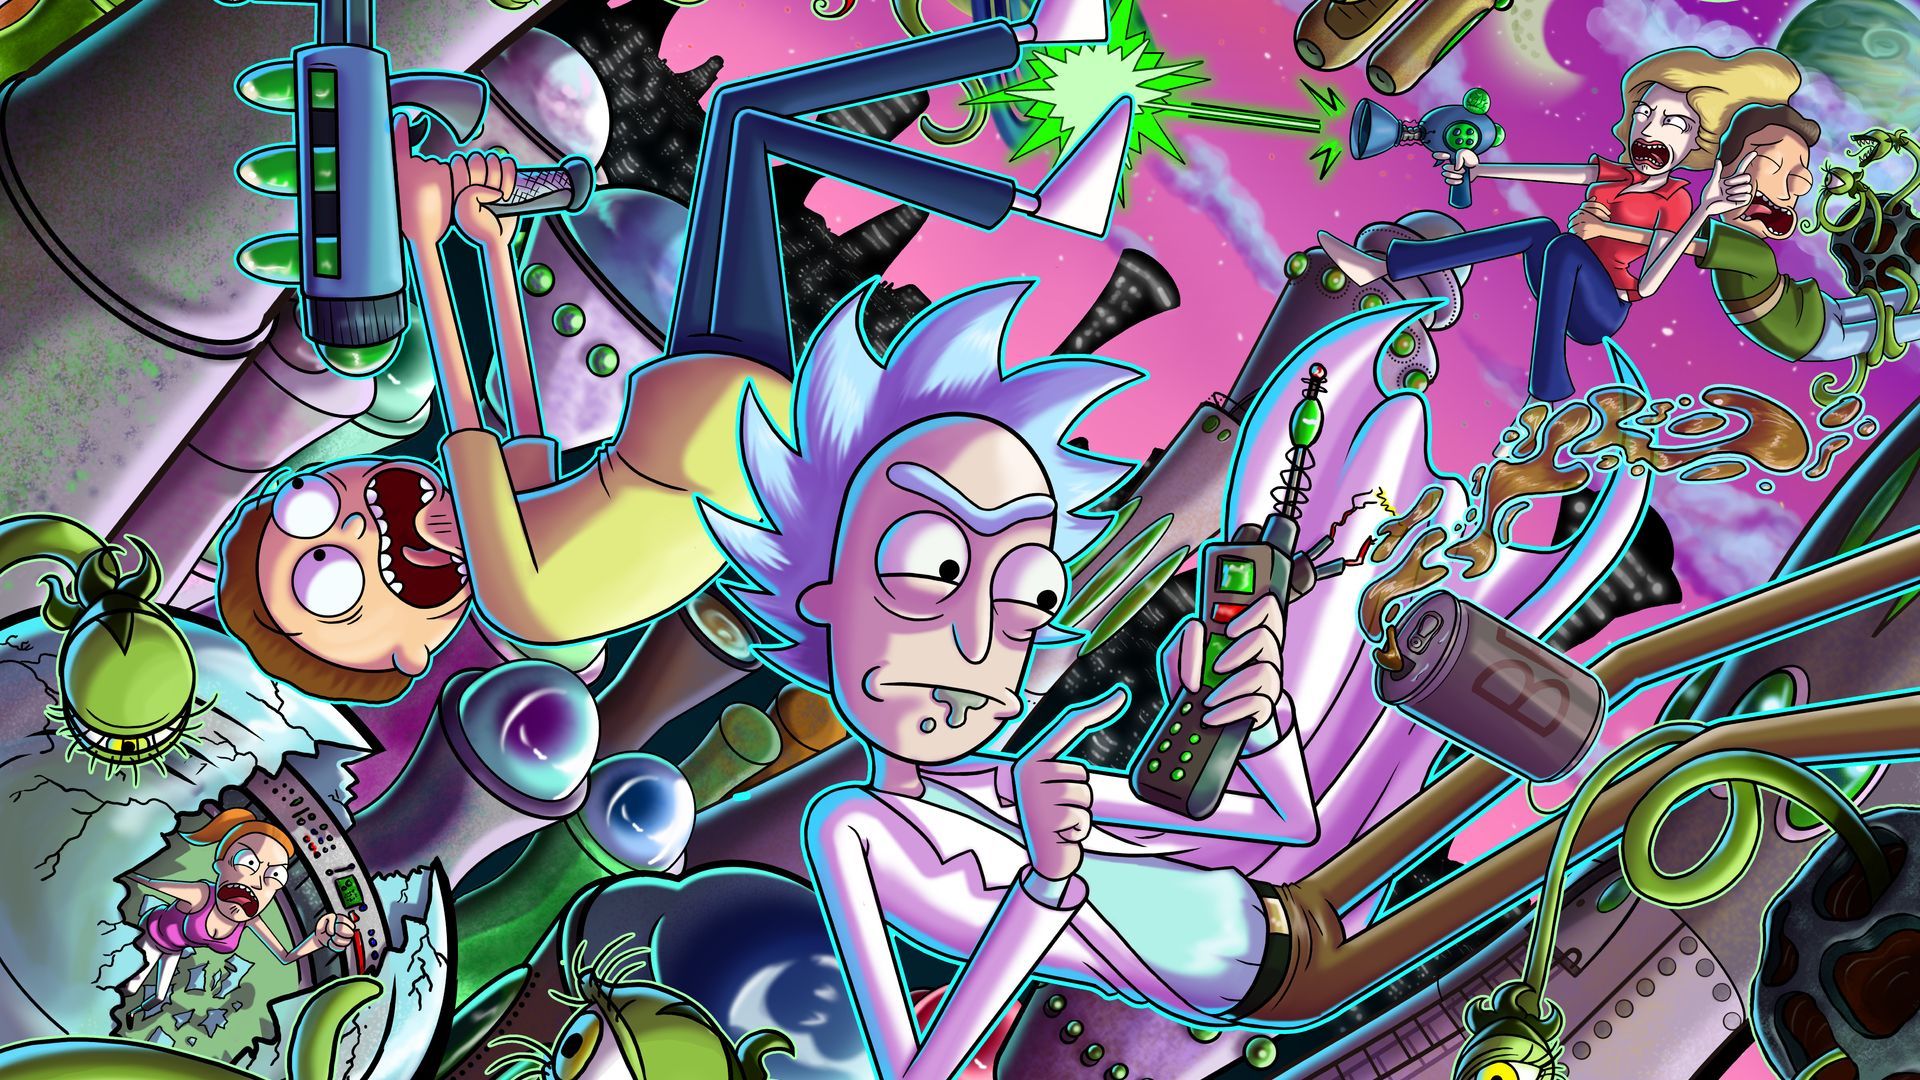 Rick and Morty 1920X1080 Wallpaper Free Rick and Morty